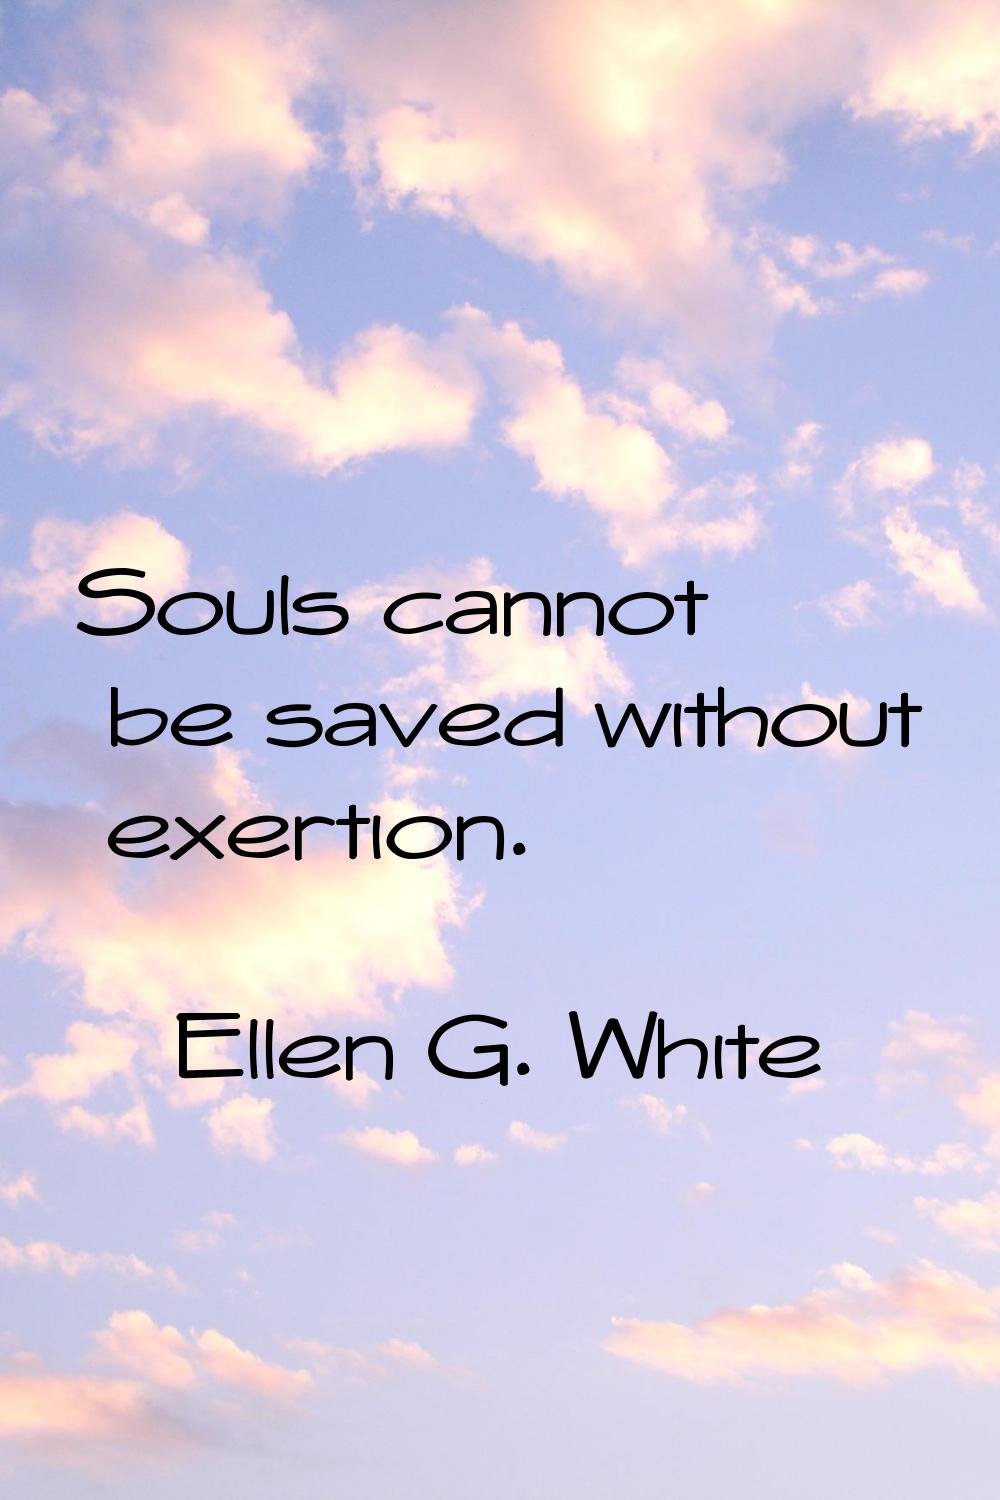 Souls cannot be saved without exertion.